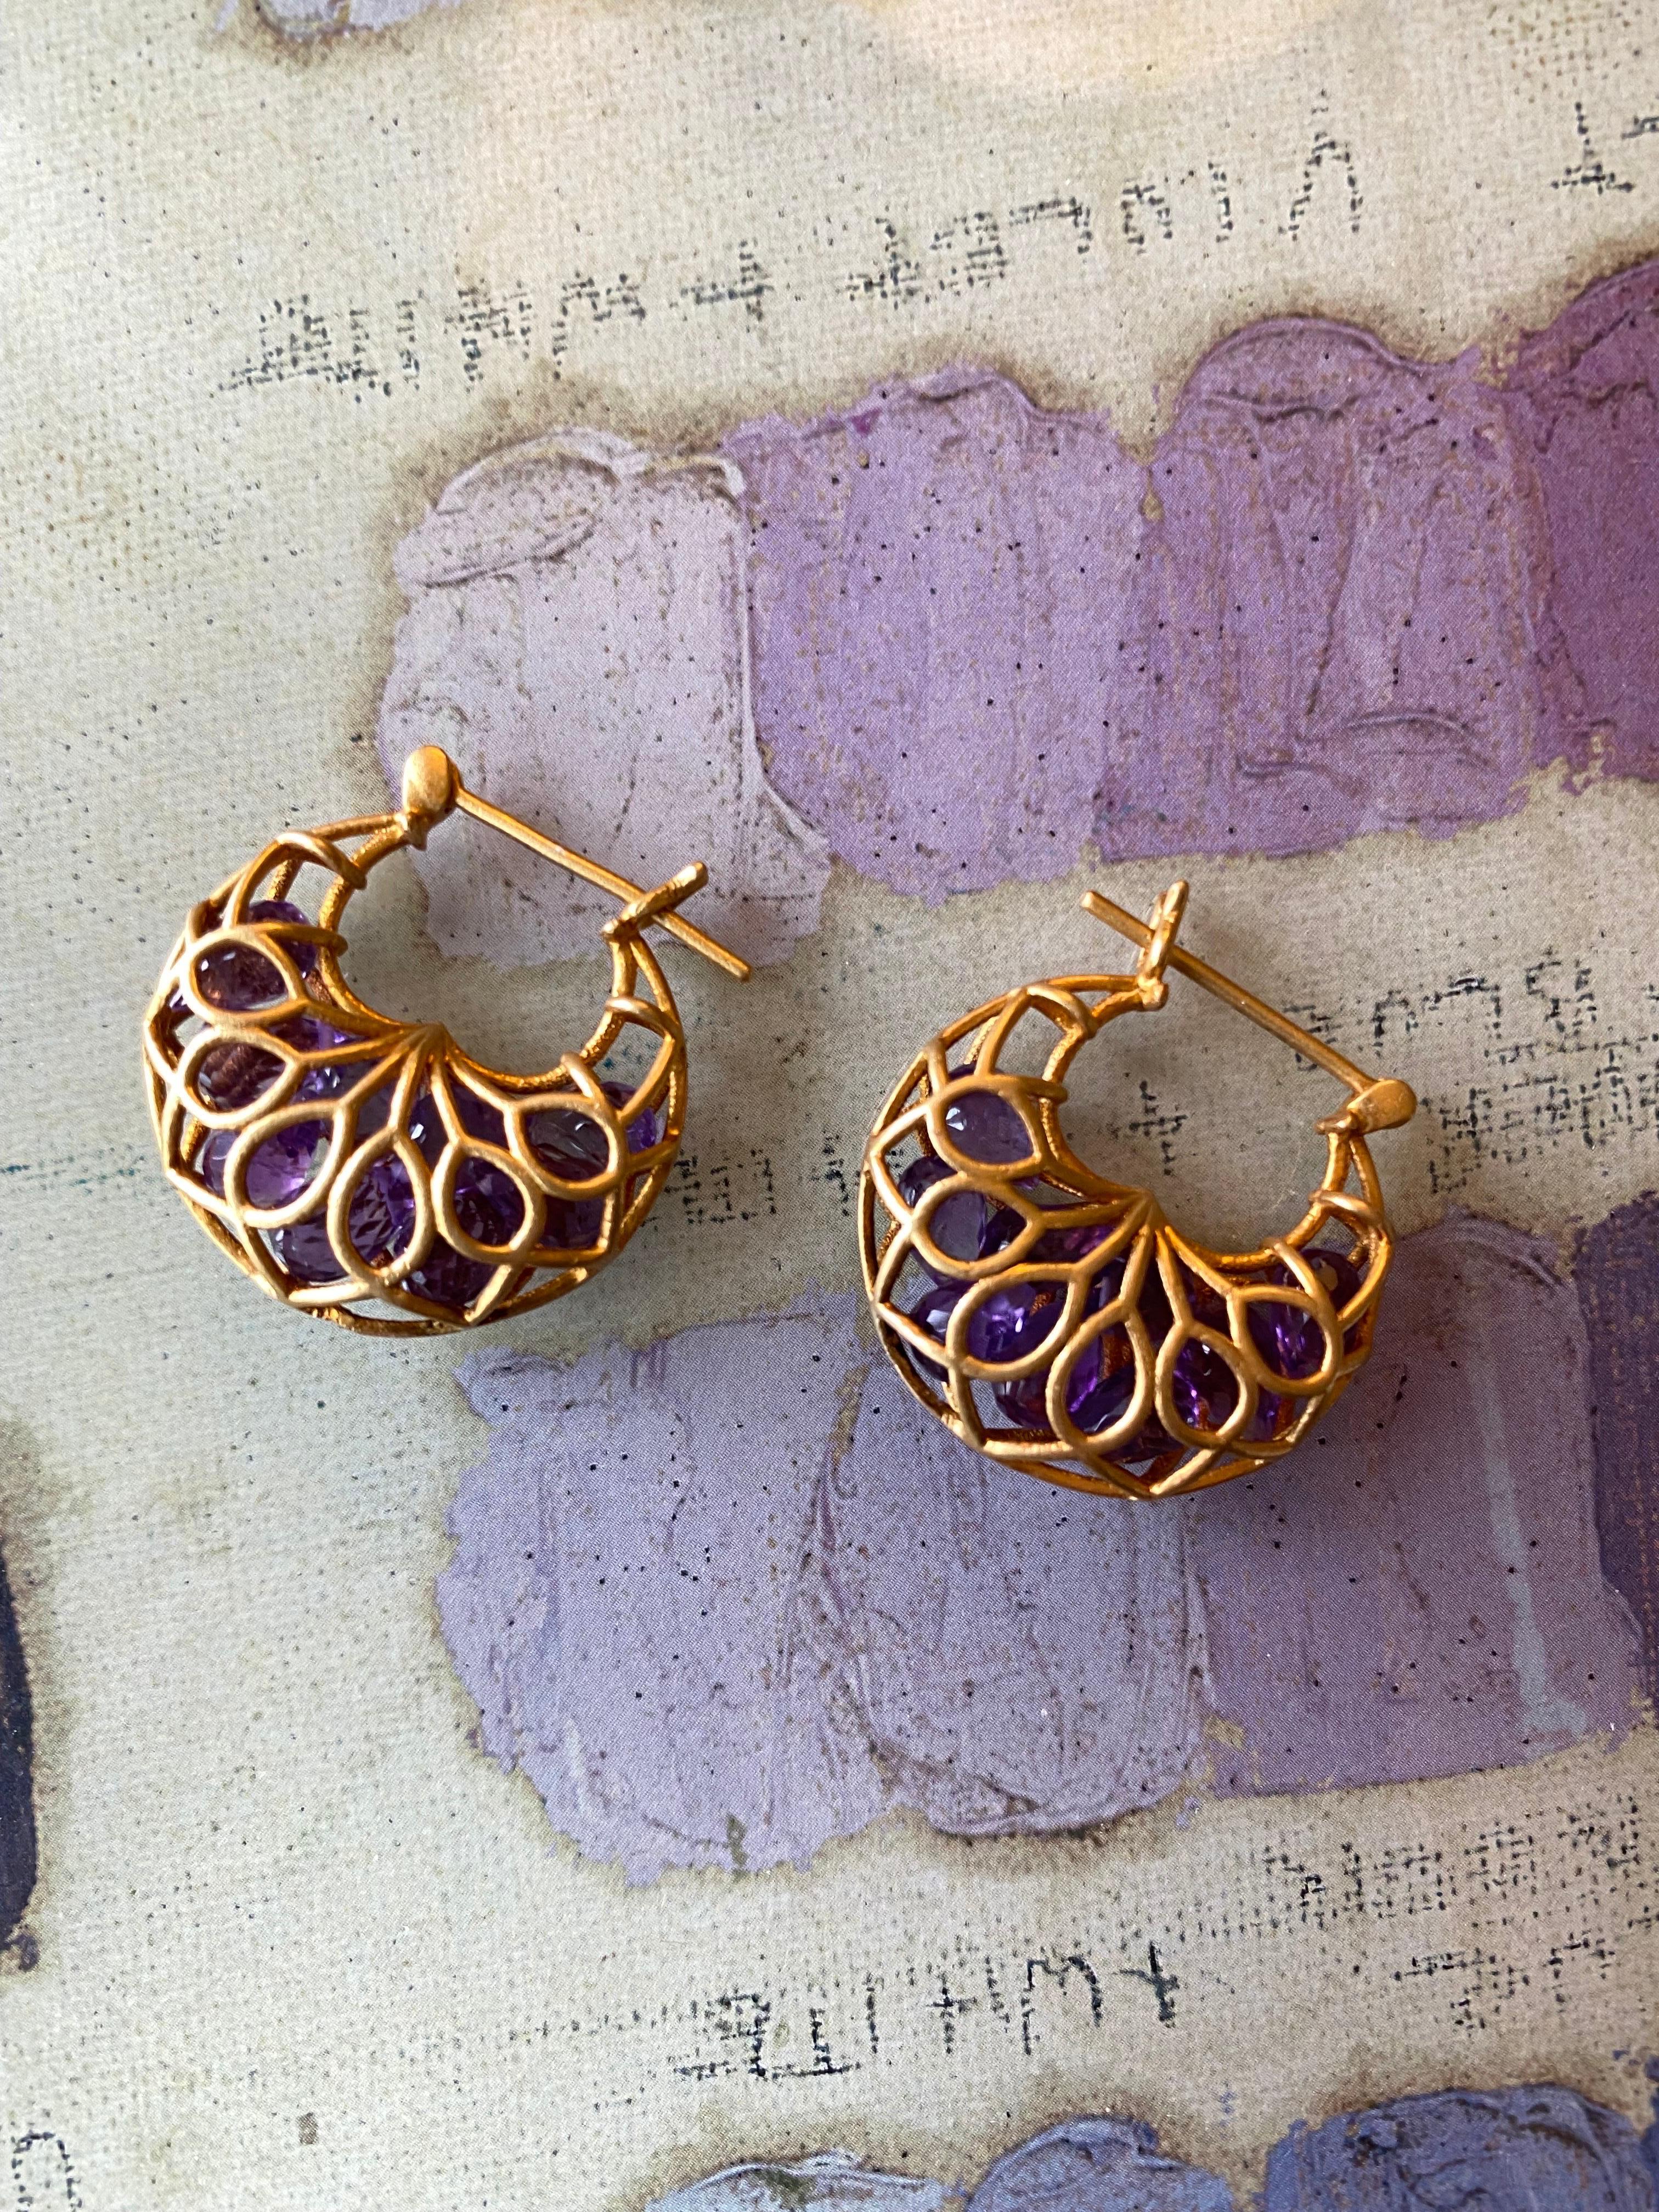 Amethyst drops float inside these 18kt Gold Cage Lauren Harper Hoops.  Lightweight but a big look.  Stones sparkle with a beautiful Amethyst hue from within the cage.  Ships directly from original designer and creator, Lauren Harper, in beautiful